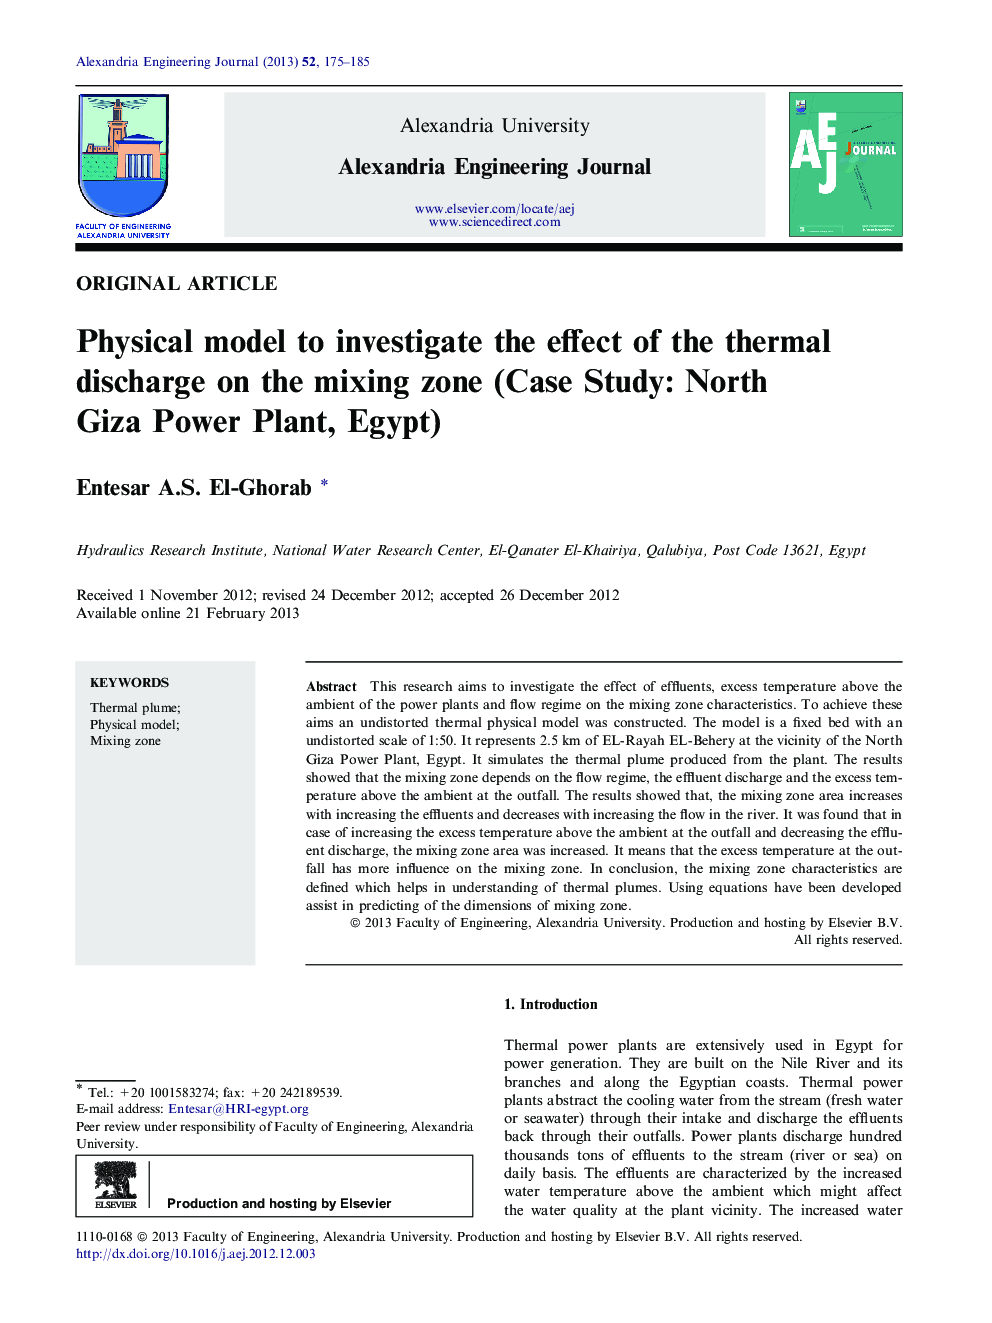 Physical model to investigate the effect of the thermal discharge on the mixing zone (Case Study: North Giza Power Plant, Egypt)